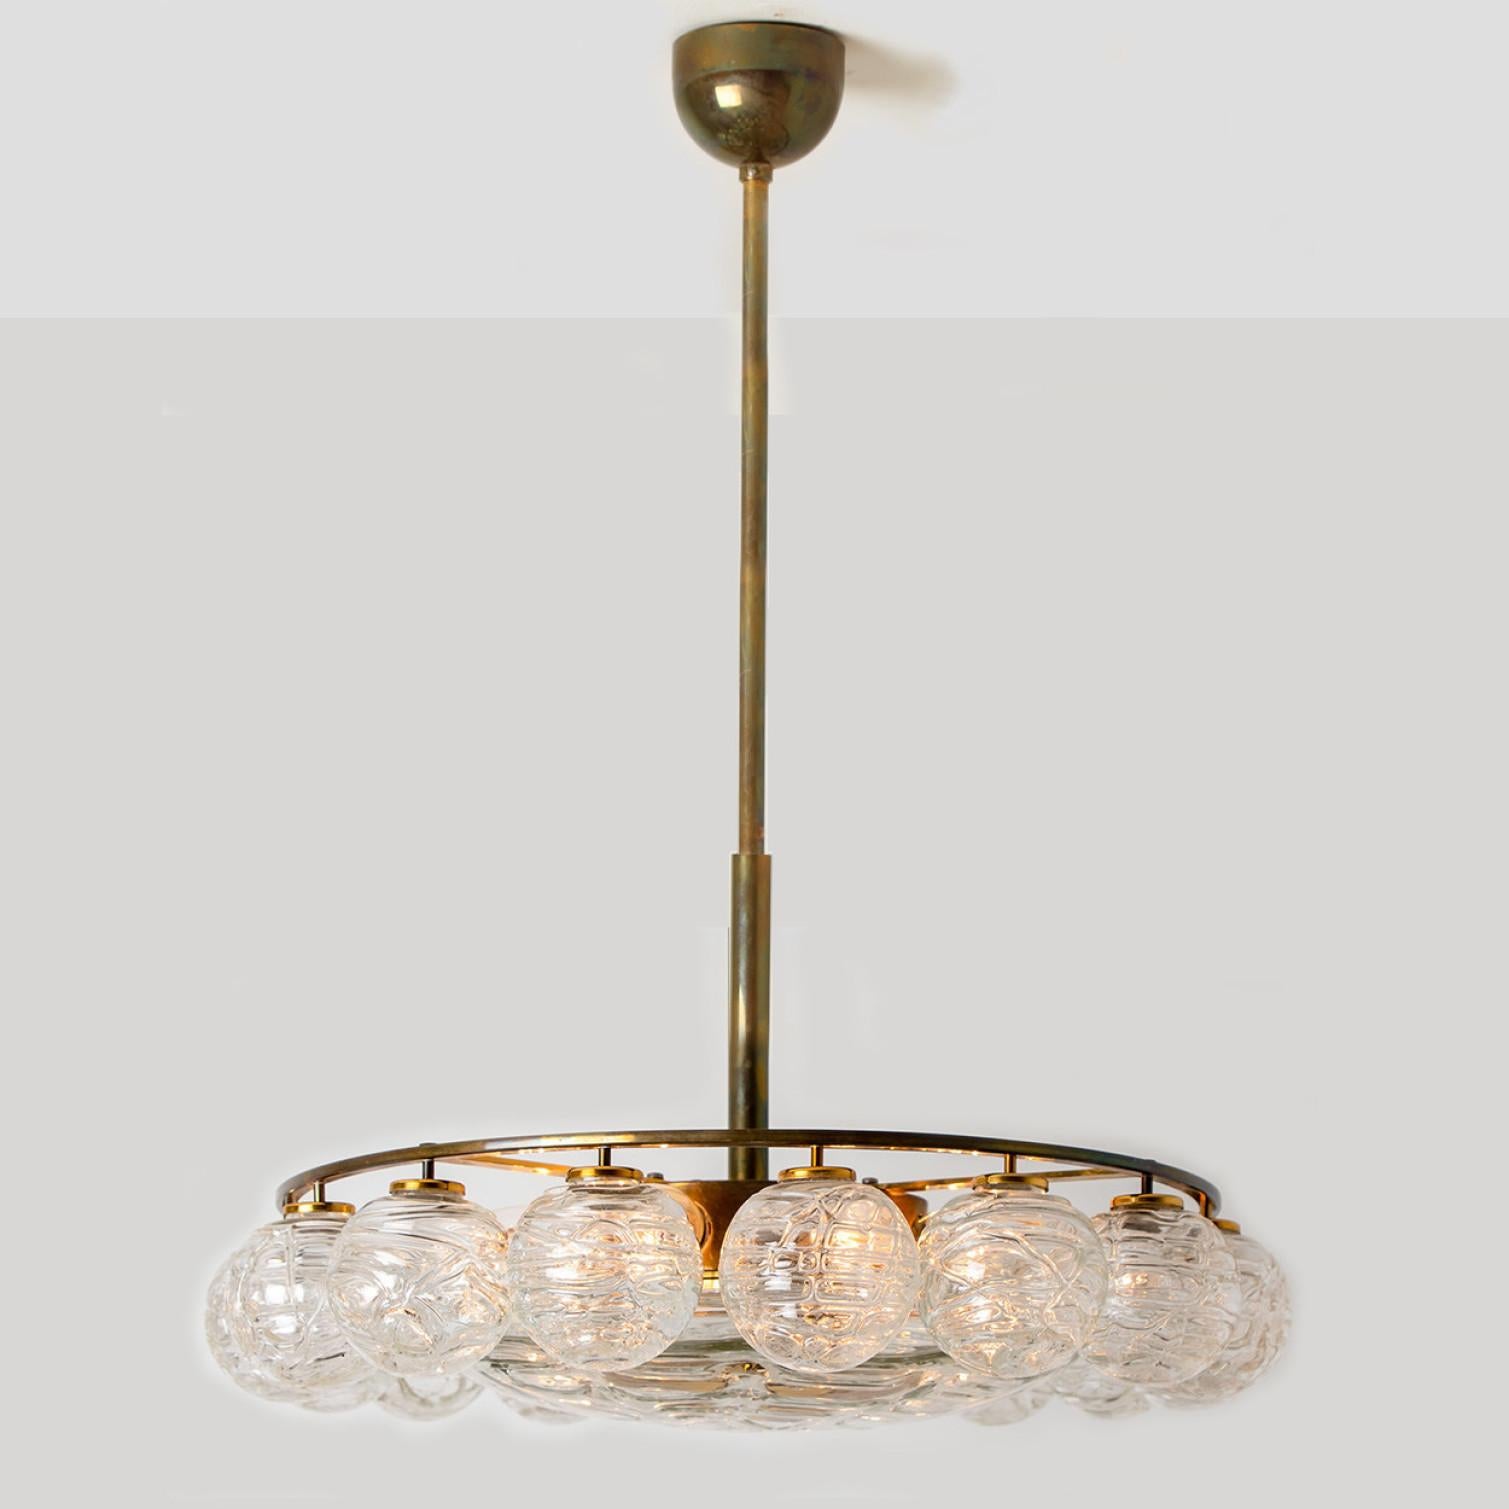 Beautiful chandelier with 16 small glass globes on a brass frame by Doria Leuchten, manufacturered in 1965. With 16 hand blown murano glass globes.

High-end thick Murano crystal glass globes made out of overlay glass applied in irregular swirls.